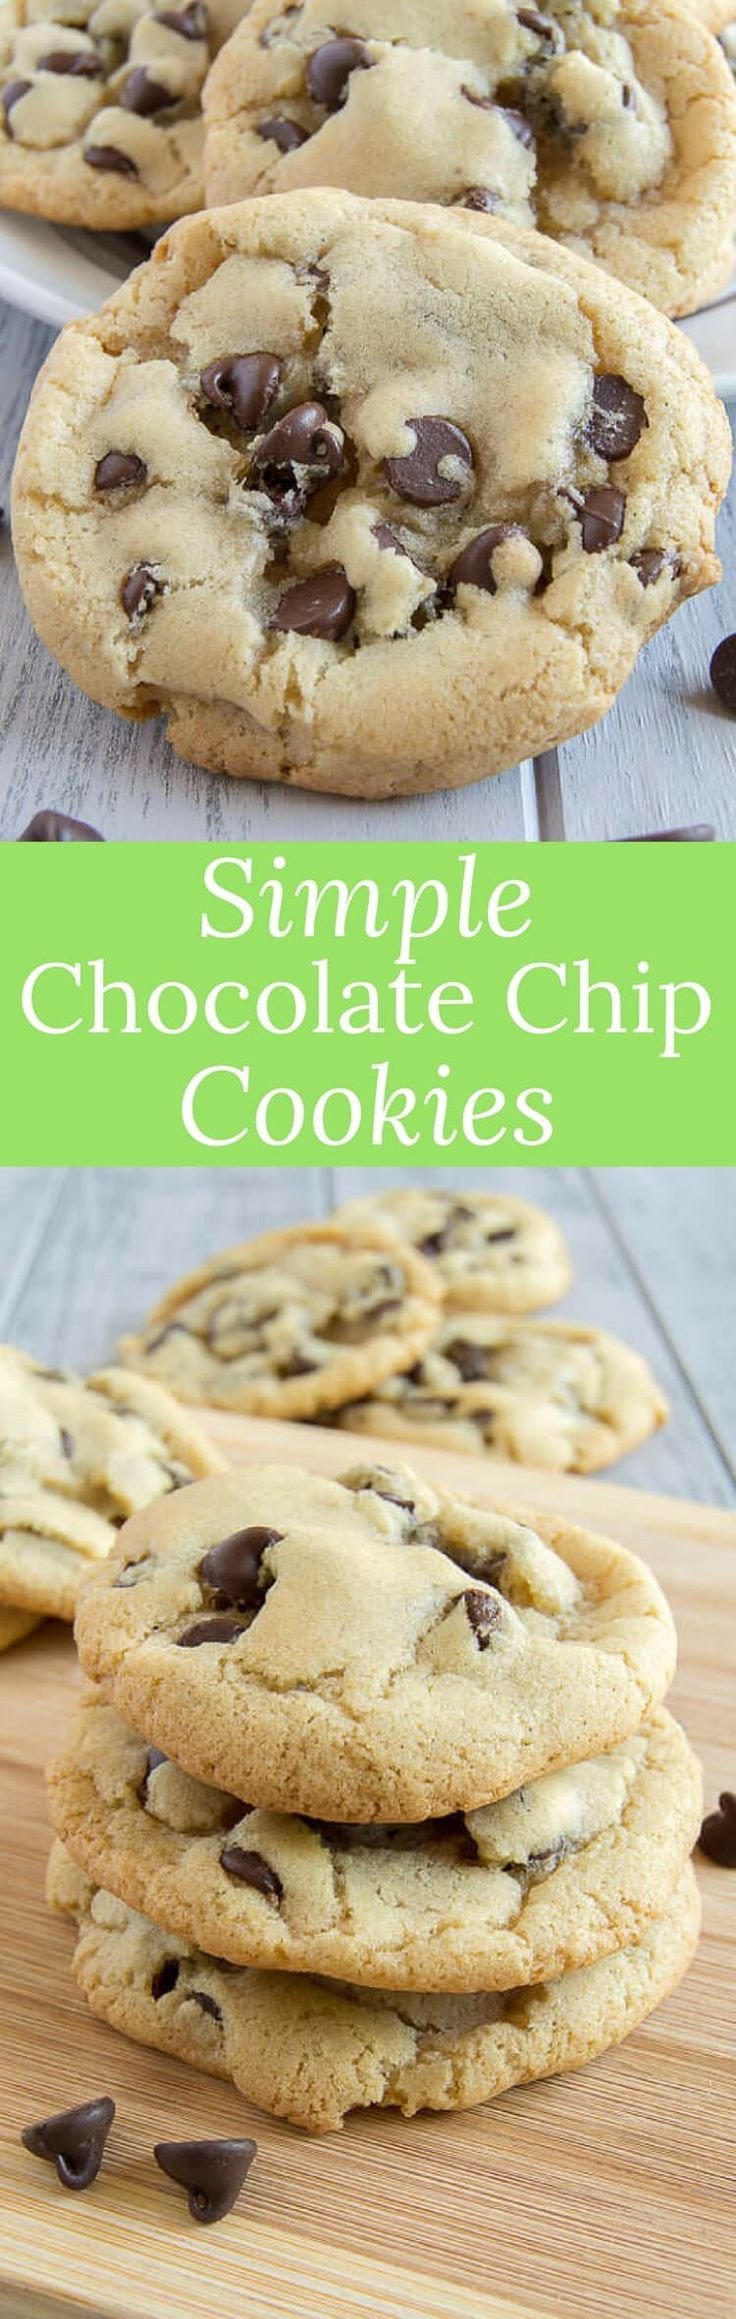 Simple Chocolate Chip Cookies
 25 best ideas about Chocolate Chip Cookies on Pinterest